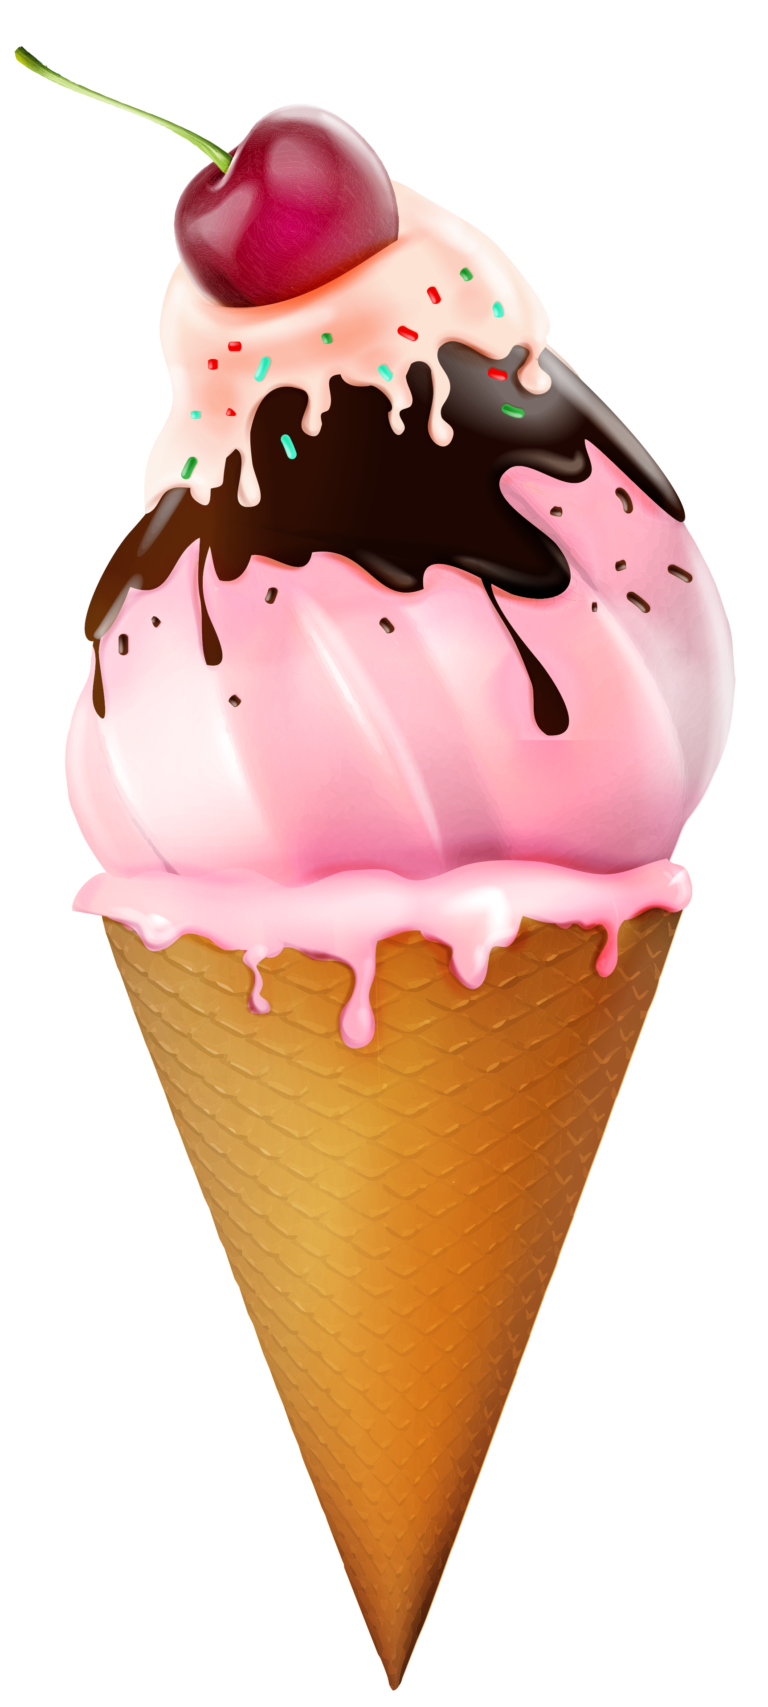 Ice cream cone 0 images about ice printables on clipart WikiClipArt